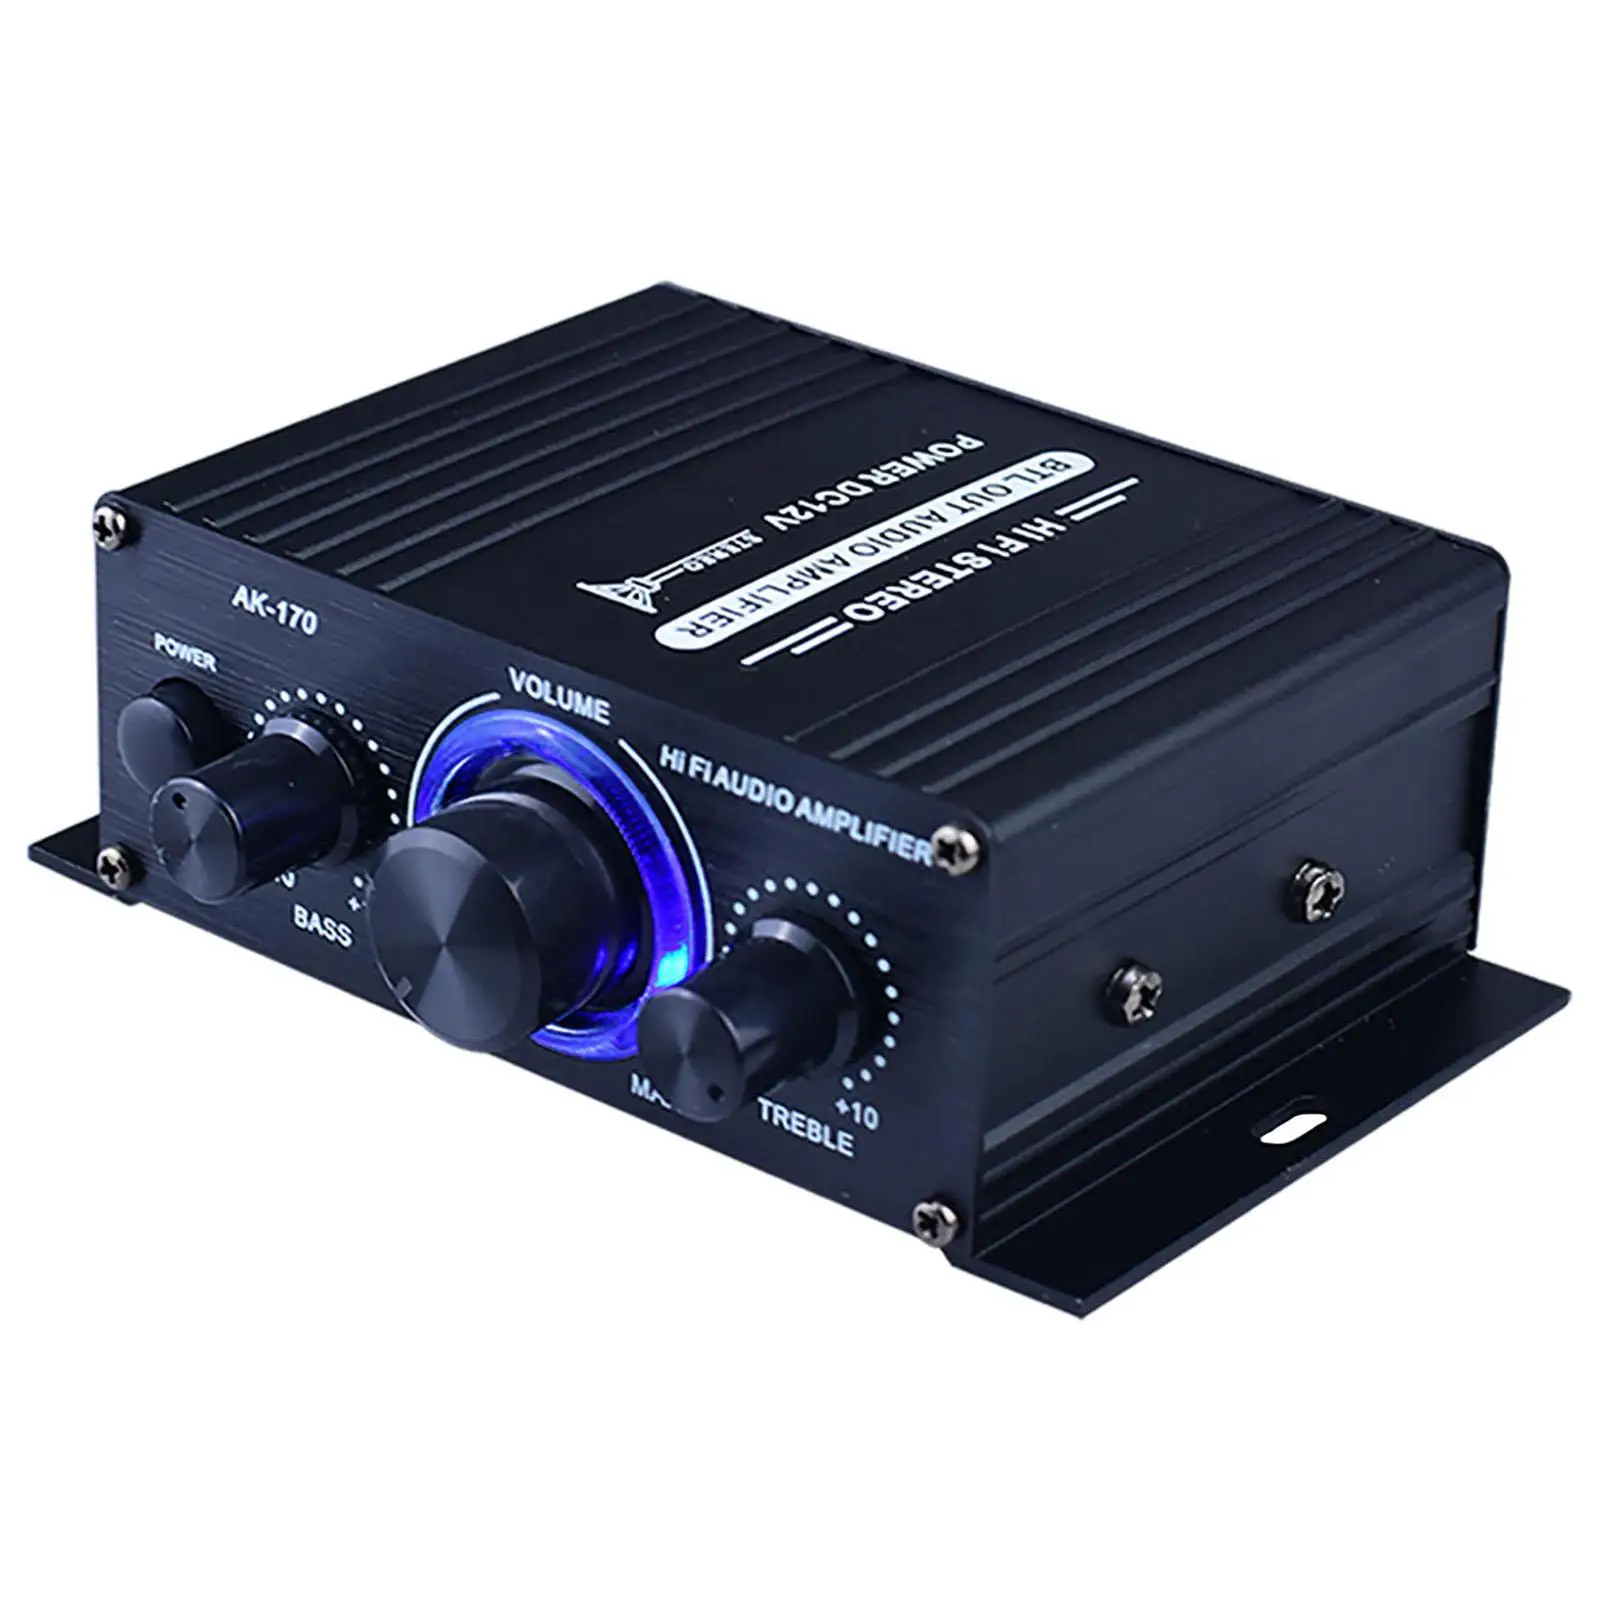 HiFi Audio Power Amplifier 20W+20W Stereo Receiver Amp for Home Audio System